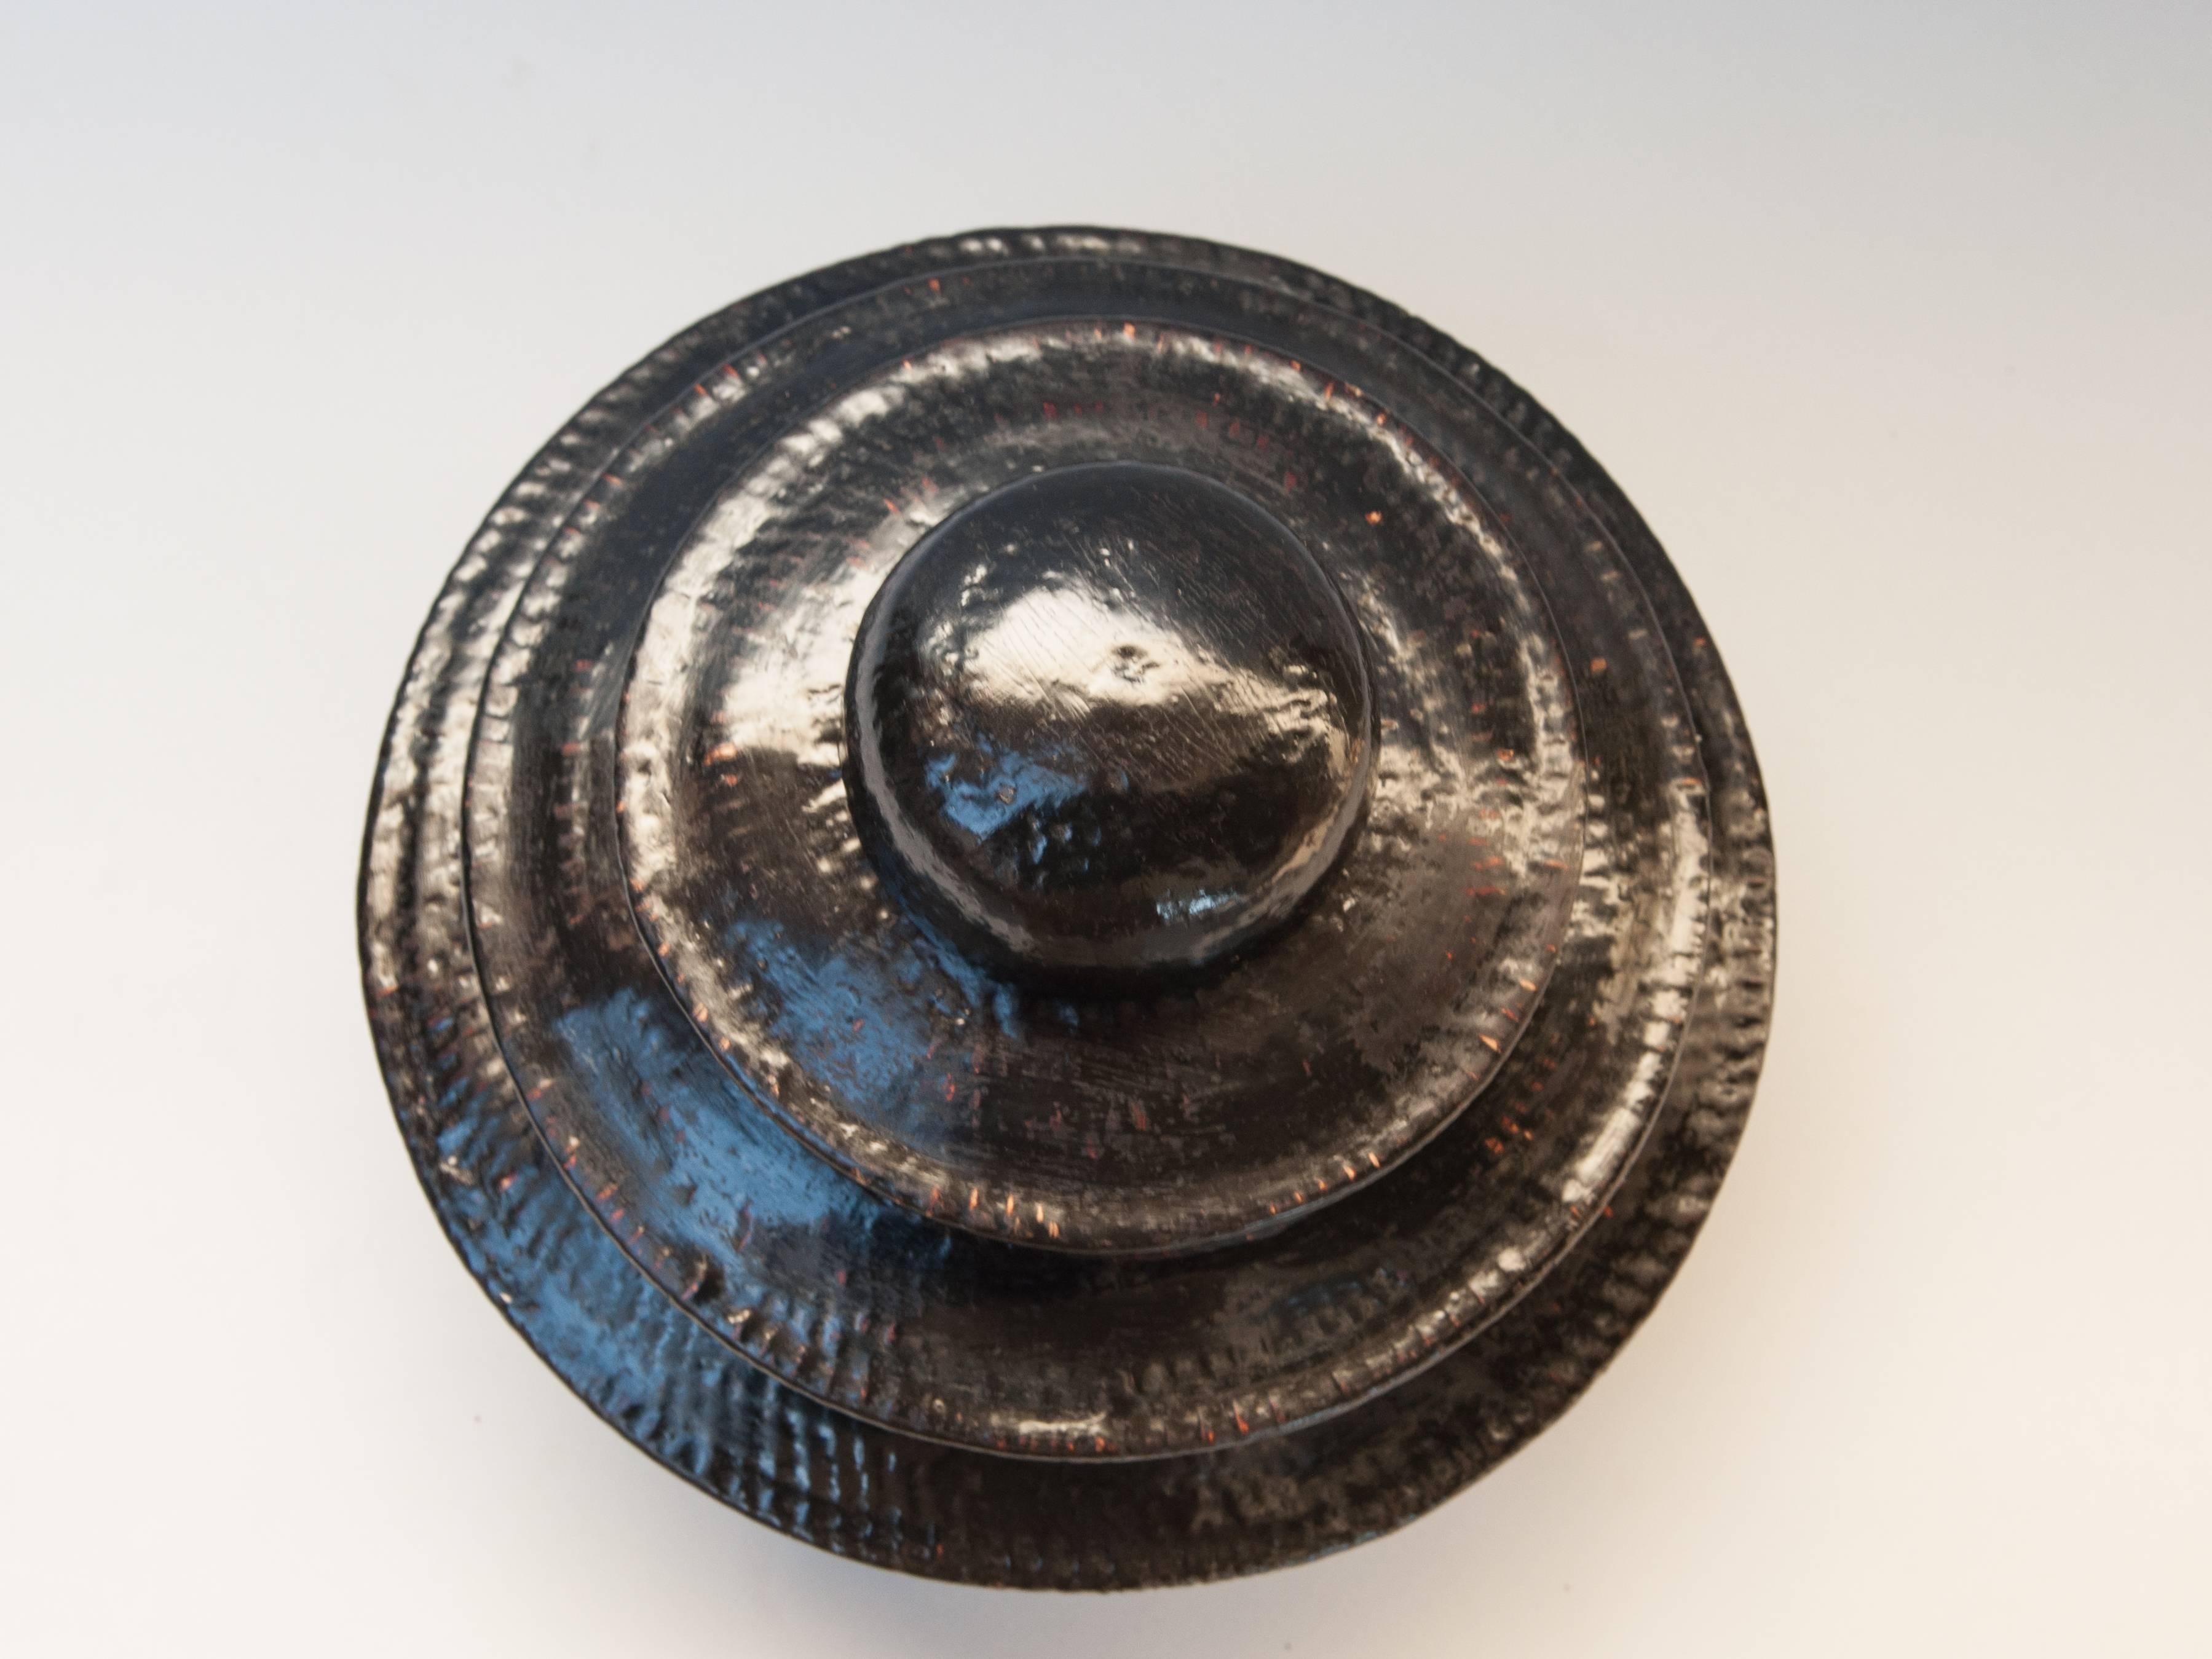 Tiered Black Lacquer Offering Vessel, Hsun Gwet, Burma Mid-20th Century, Rattan 3